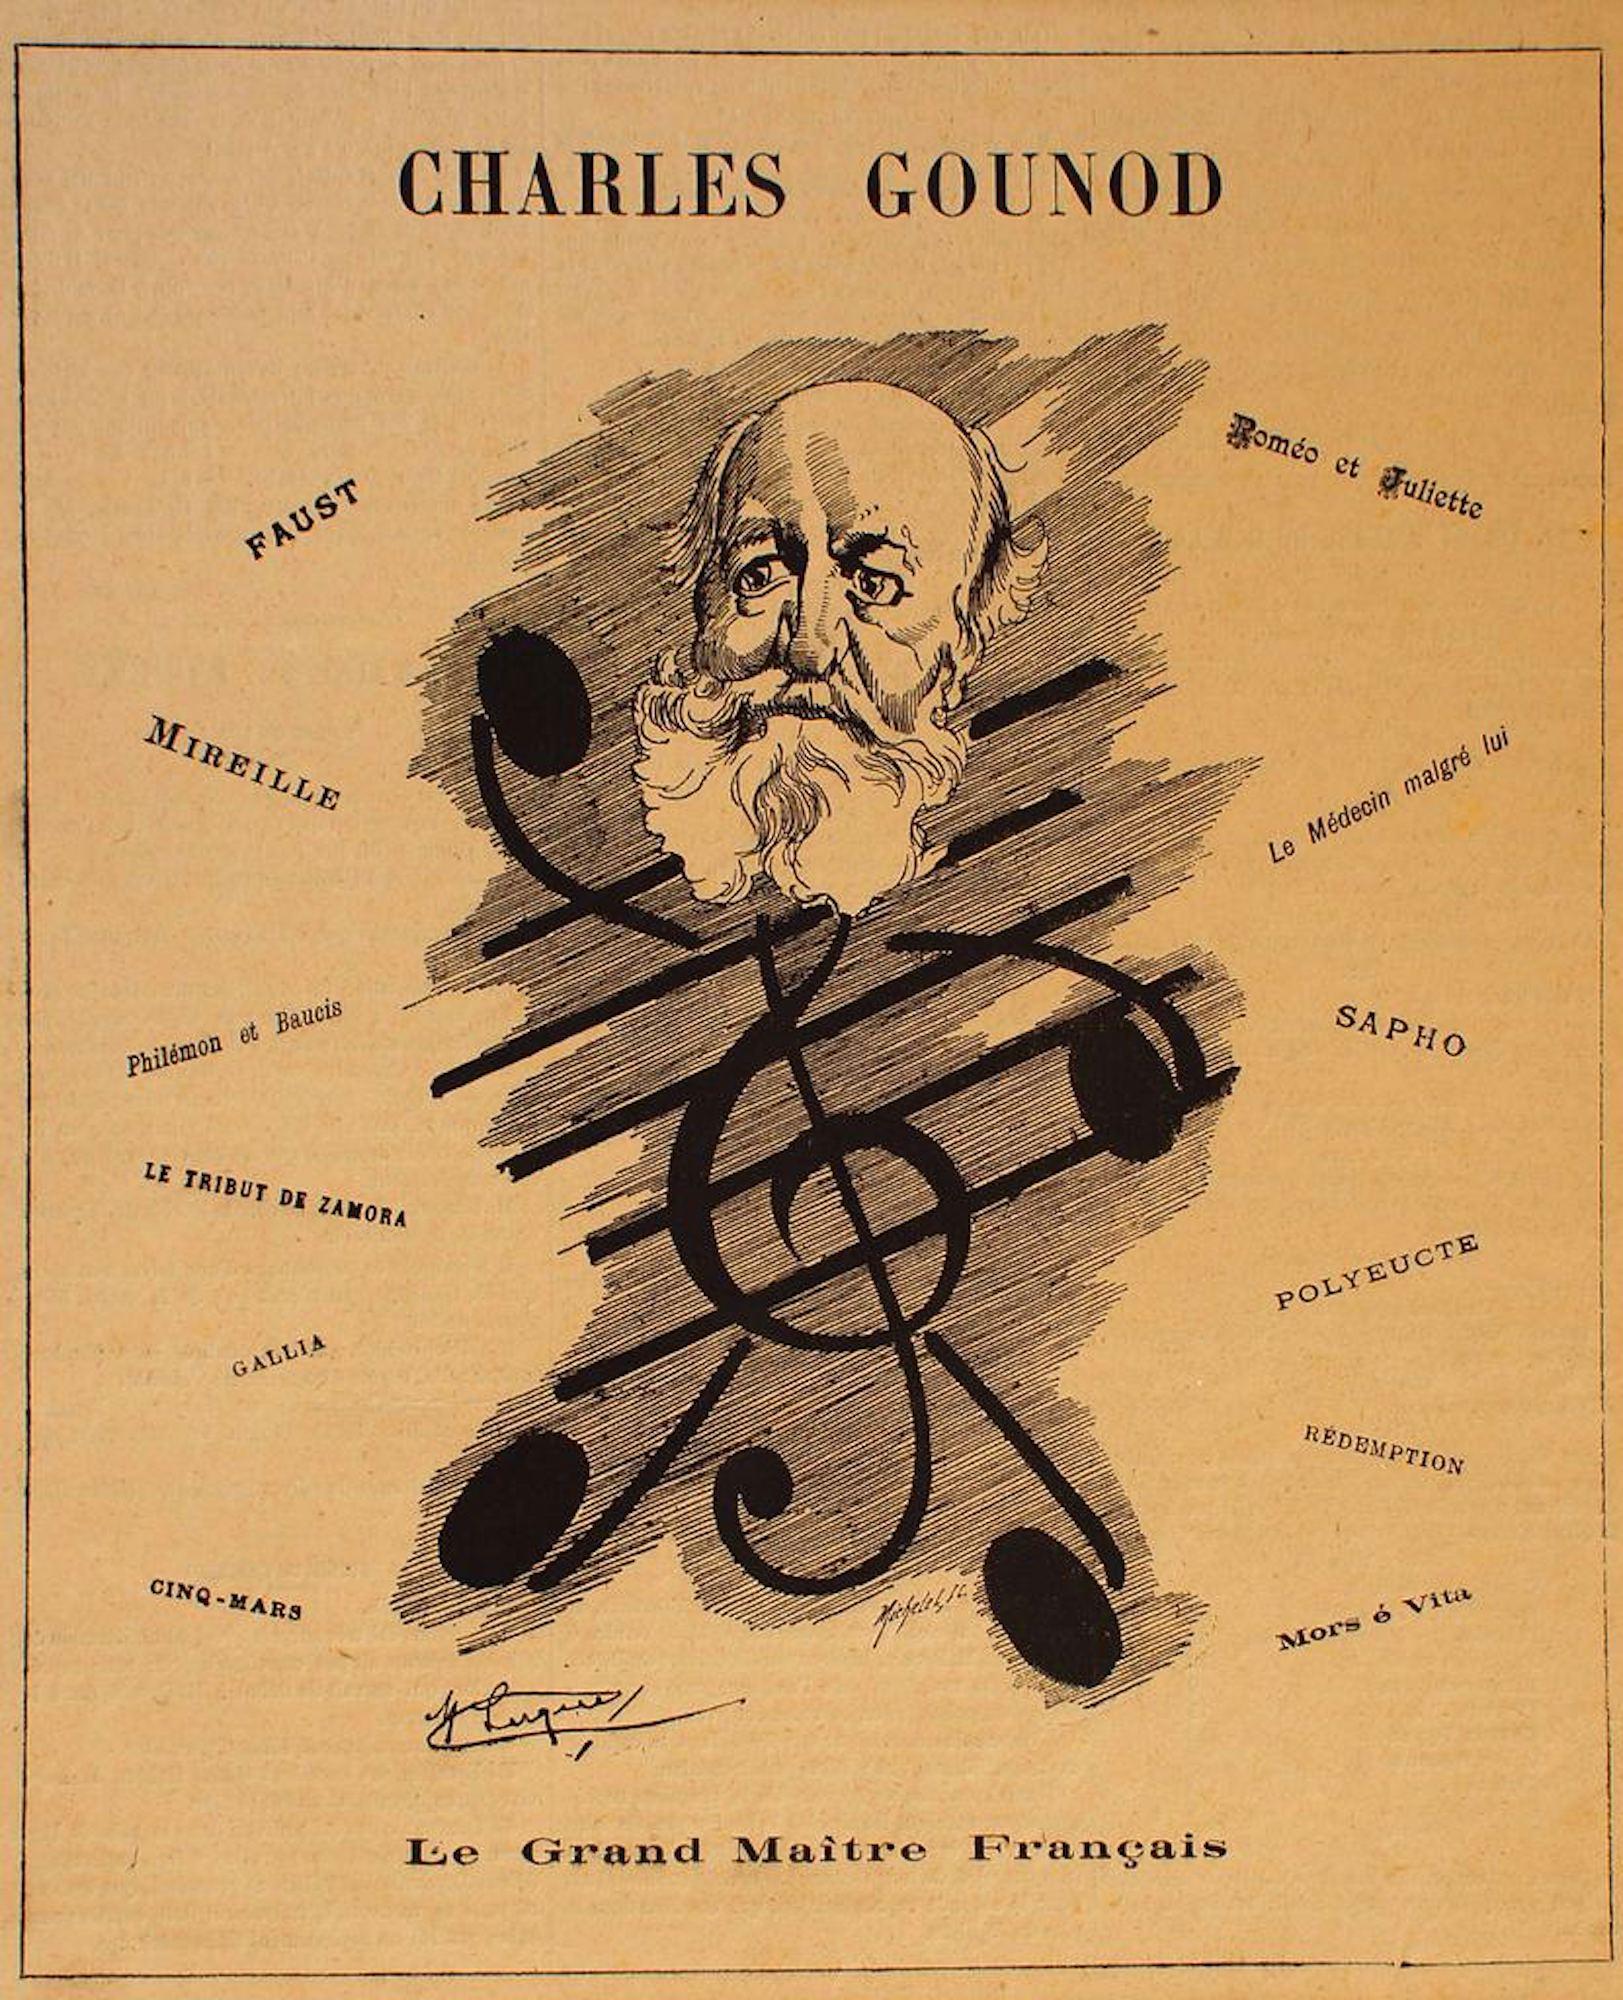 Manuel Luque Figurative Print - Portrait of the Musician Charles Gounod - Original Lithograph by M. Luque - 1886